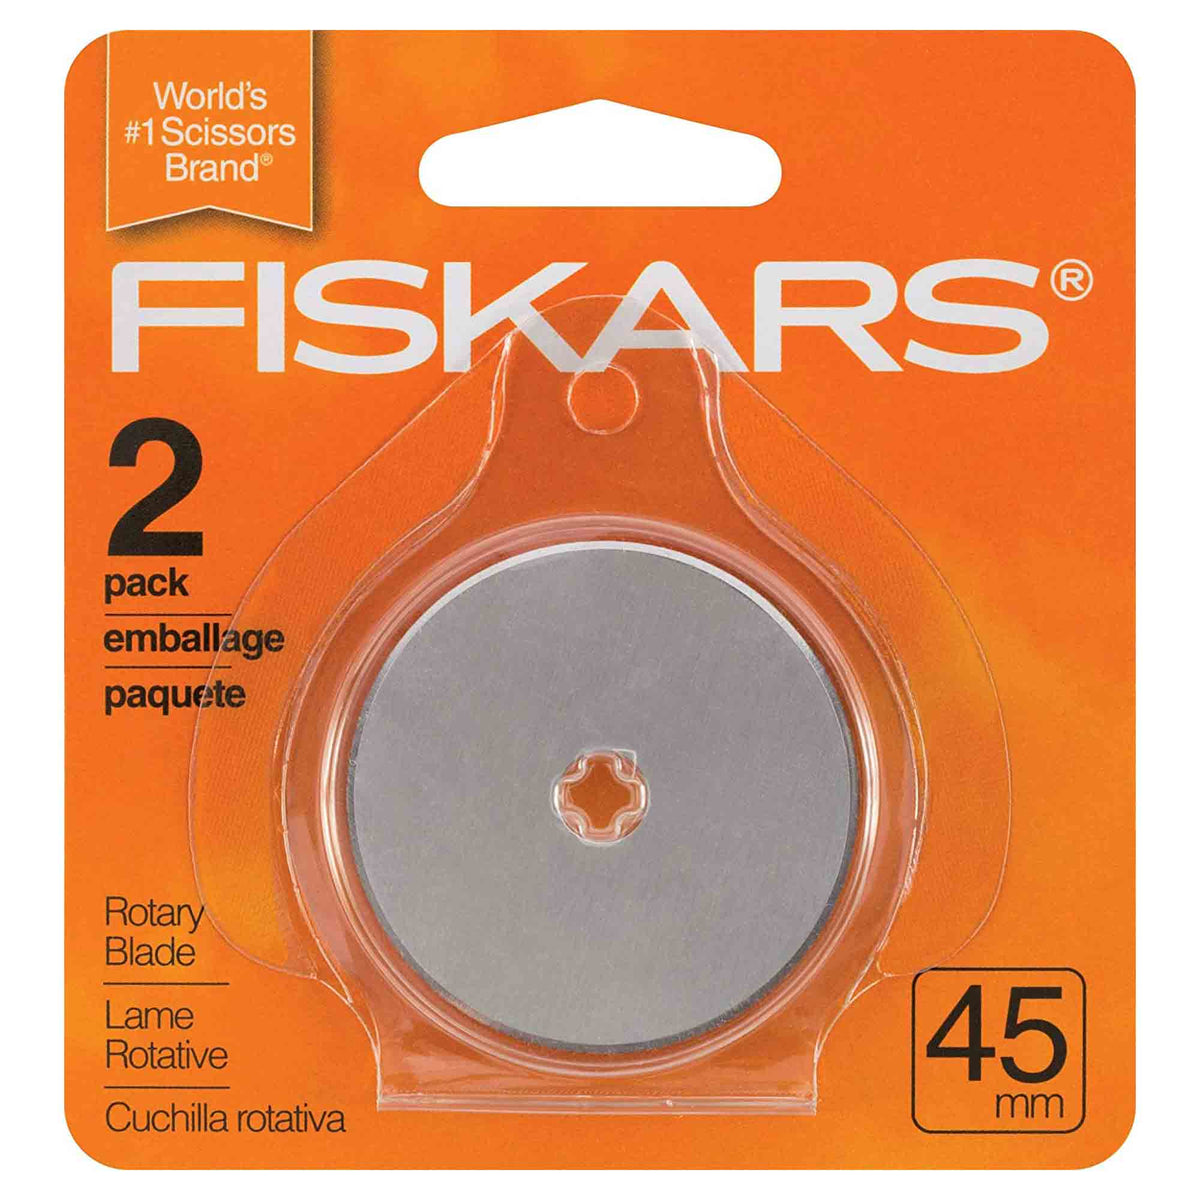 NEW FISKARS FABRIC CIRCLE CUTTER WITH ROTATING HANDLE 2 TO 12 DIAMETER